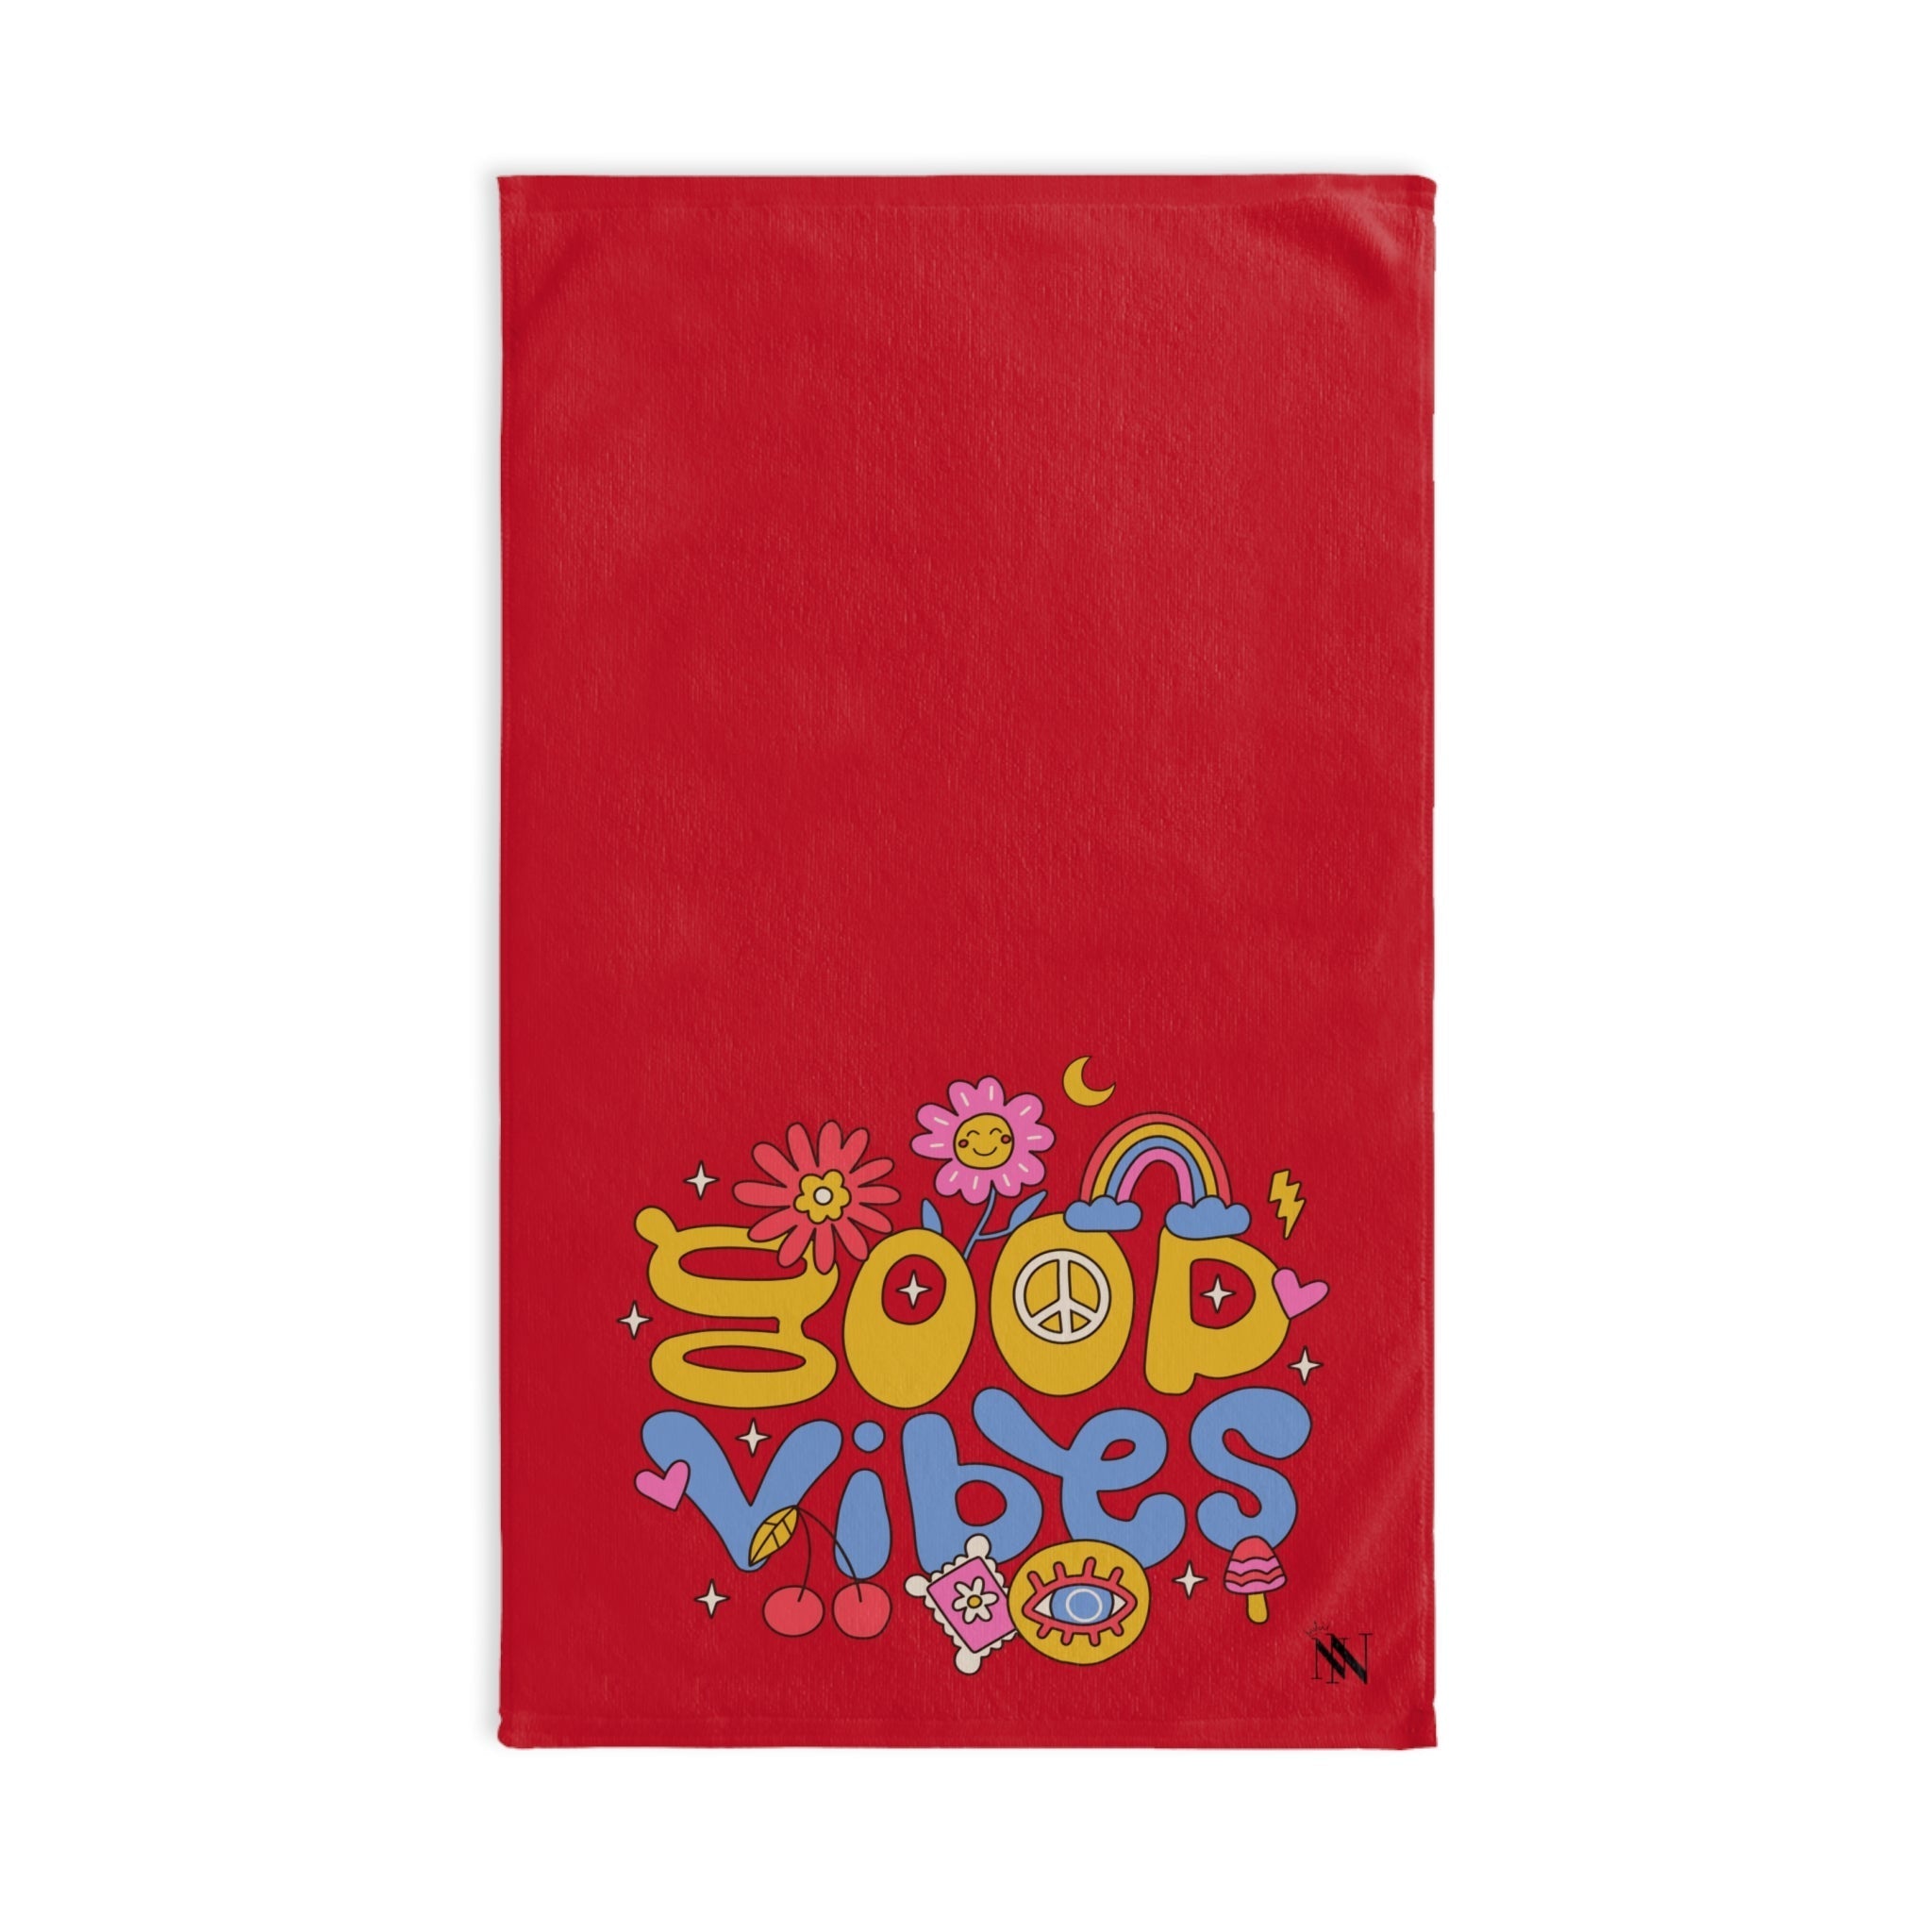 Hippie Vibes Good Red | Sexy Gifts for Boyfriend, Funny Towel Romantic Gift for Wedding Couple Fiance First Year 2nd Anniversary Valentines, Party Gag Gifts, Joke Humor Cloth for Husband Men BF NECTAR NAPKINS